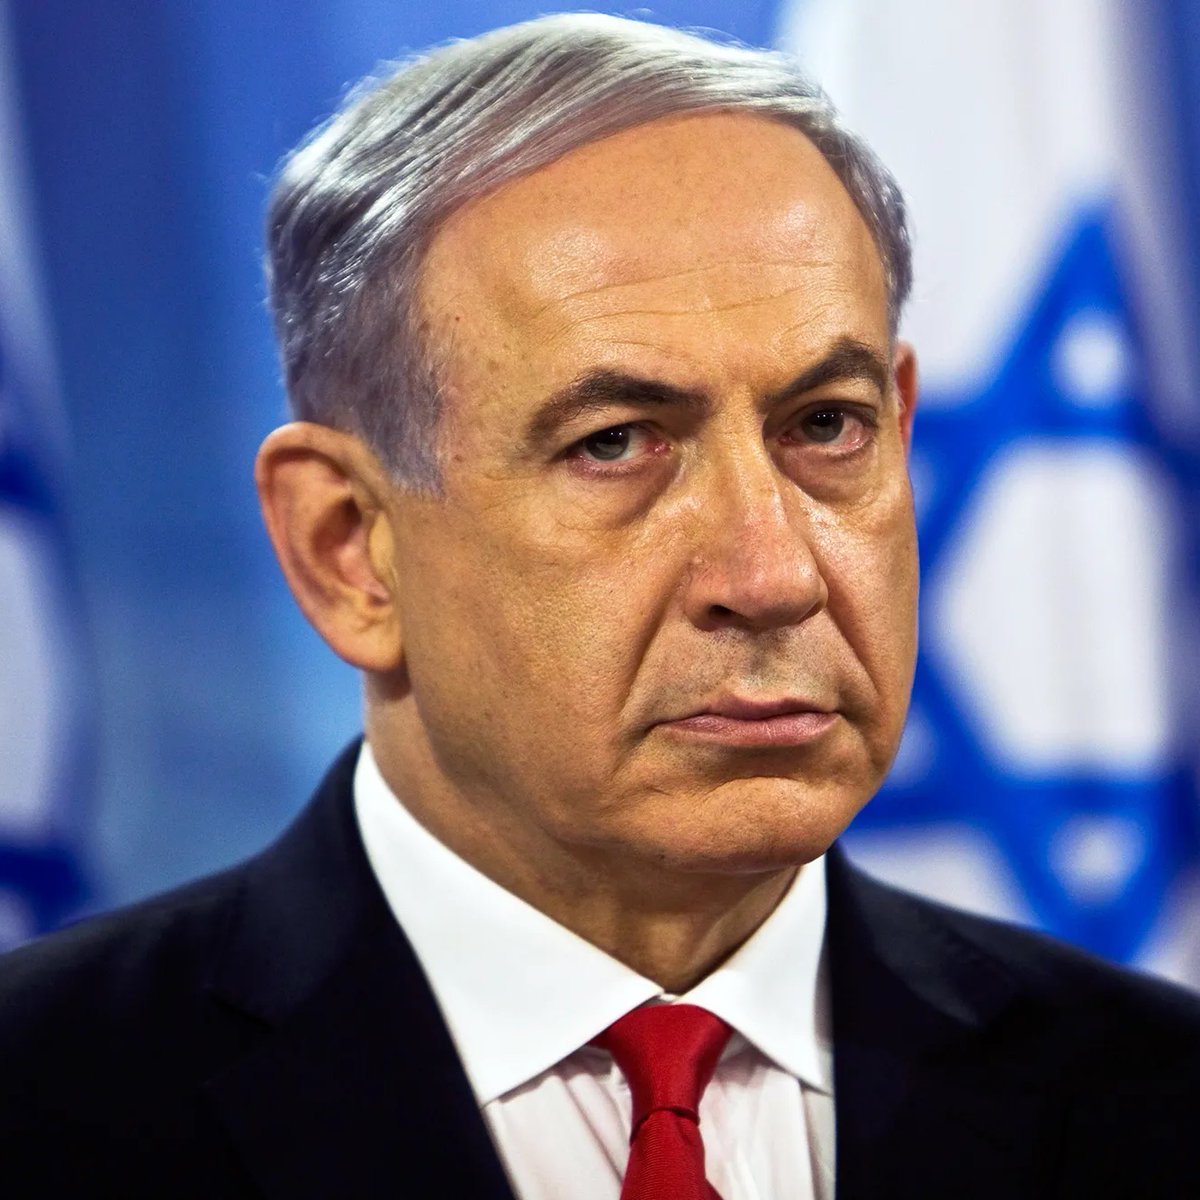 🚨🇮🇱 'ISRAELI officials fear that the International Criminal Court in The Hague will issue ARREST WARRANTS against Netanyahu and other officials.' - Israeli Channel 12